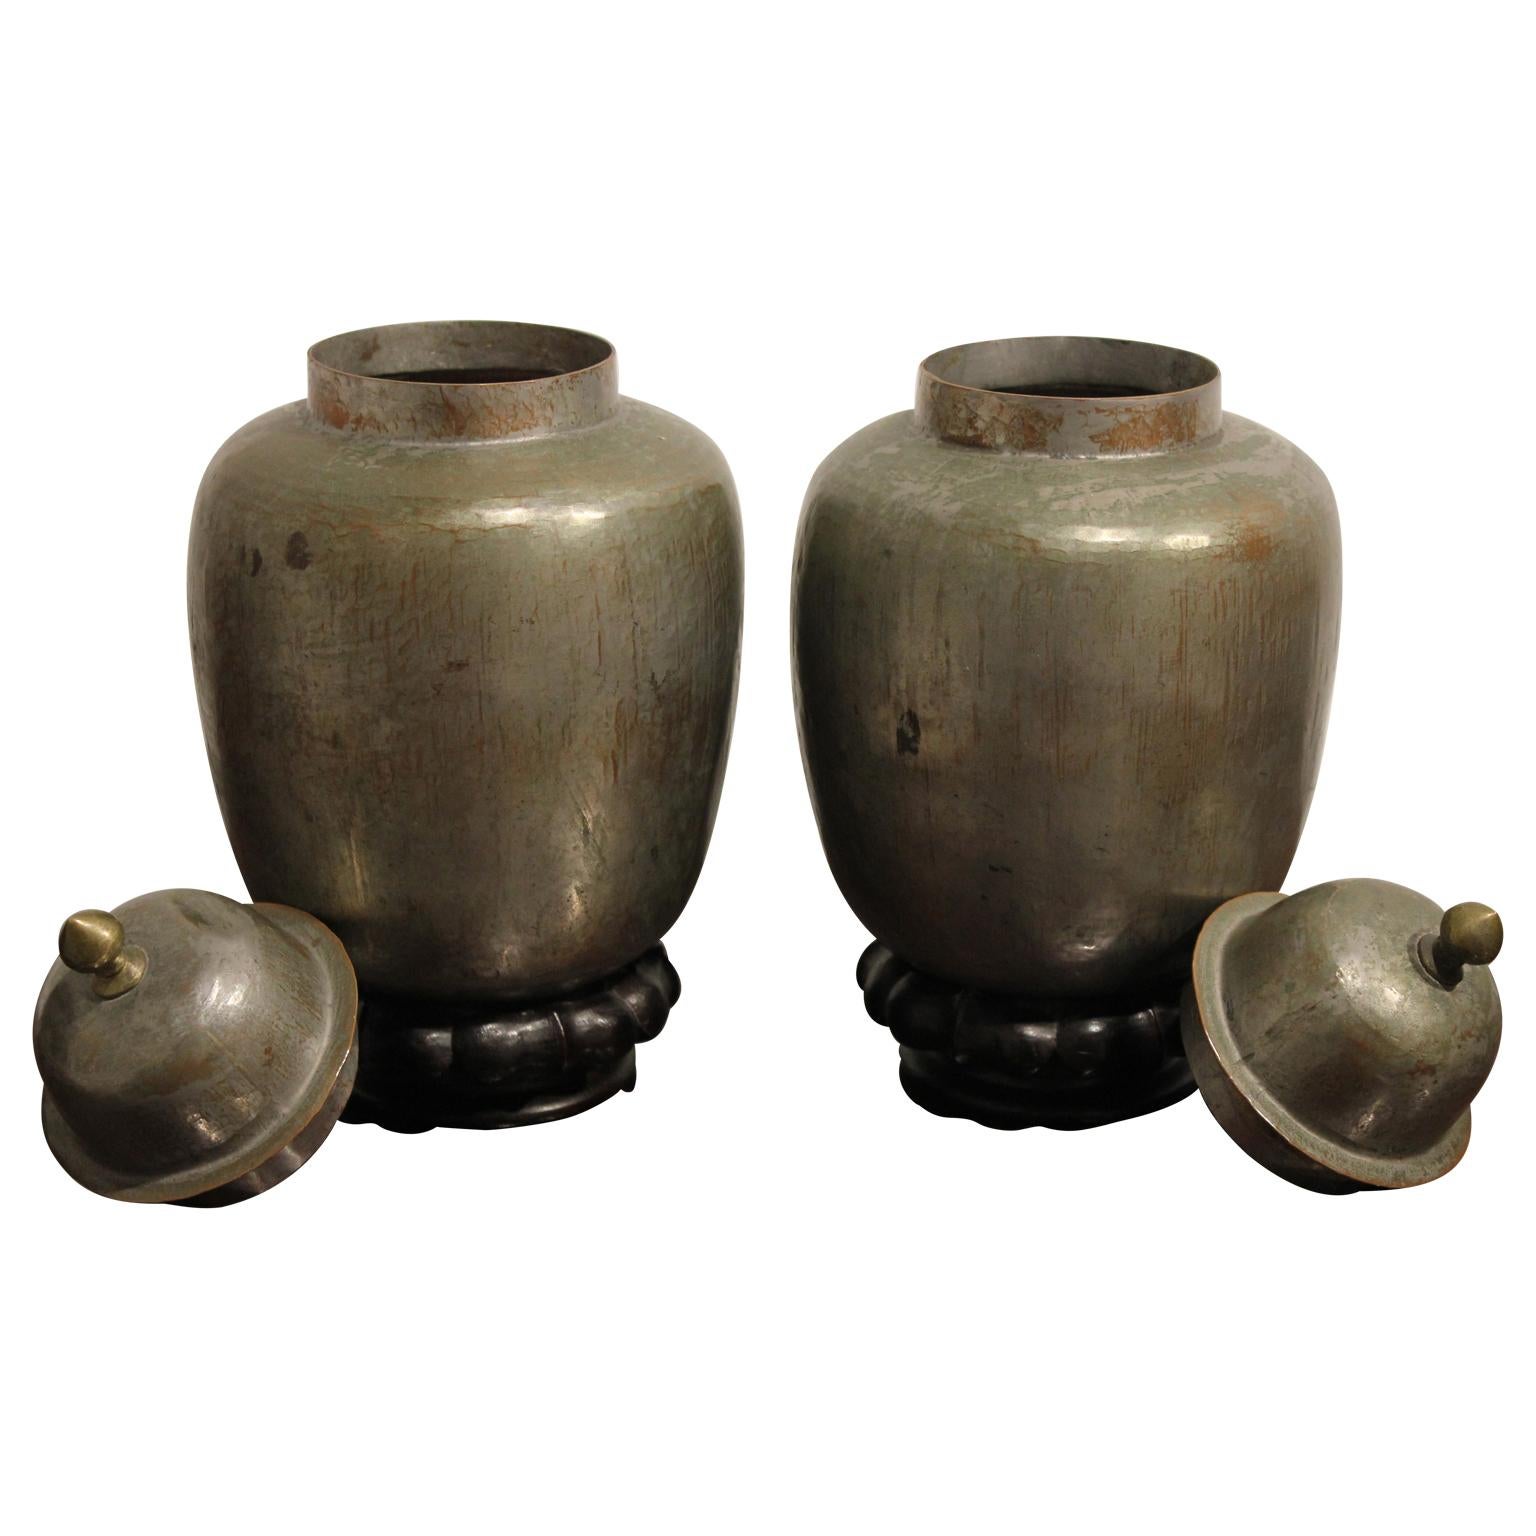 Decorative Pair of Metal Vessels with a Wooden Pedestal